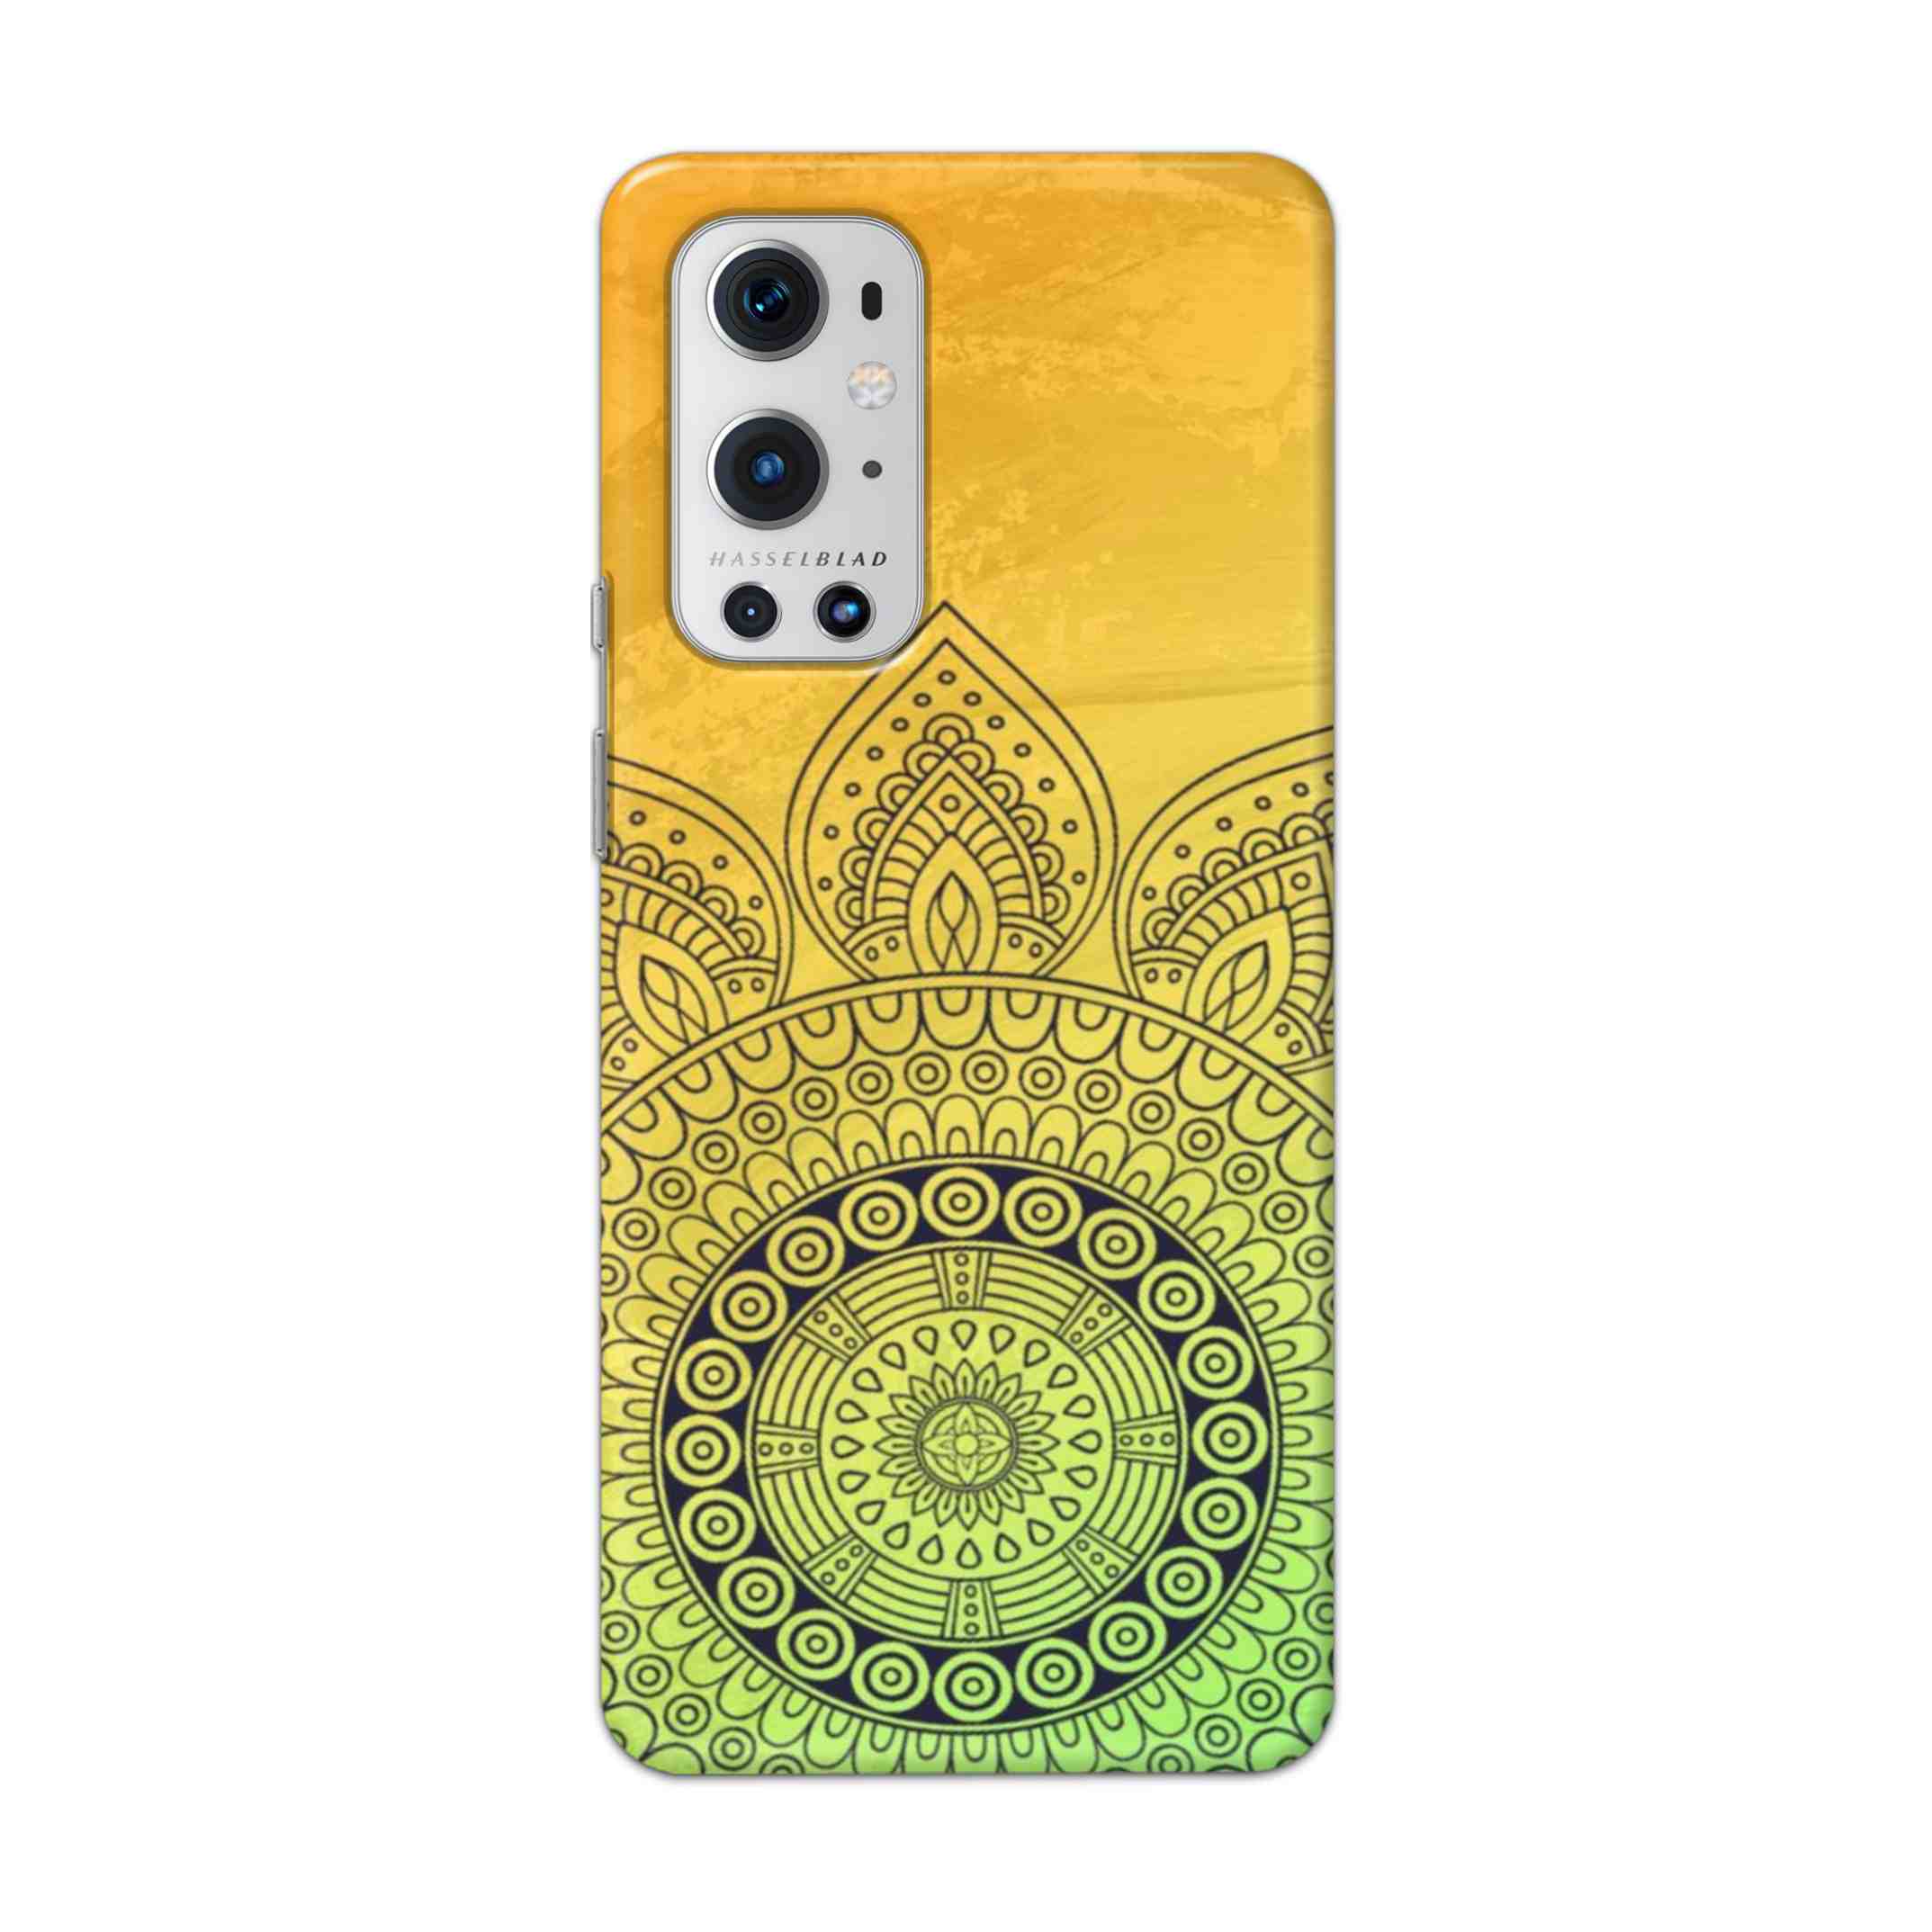 Buy Yellow Rangoli Hard Back Mobile Phone Case Cover For OnePlus 9 Pro Online